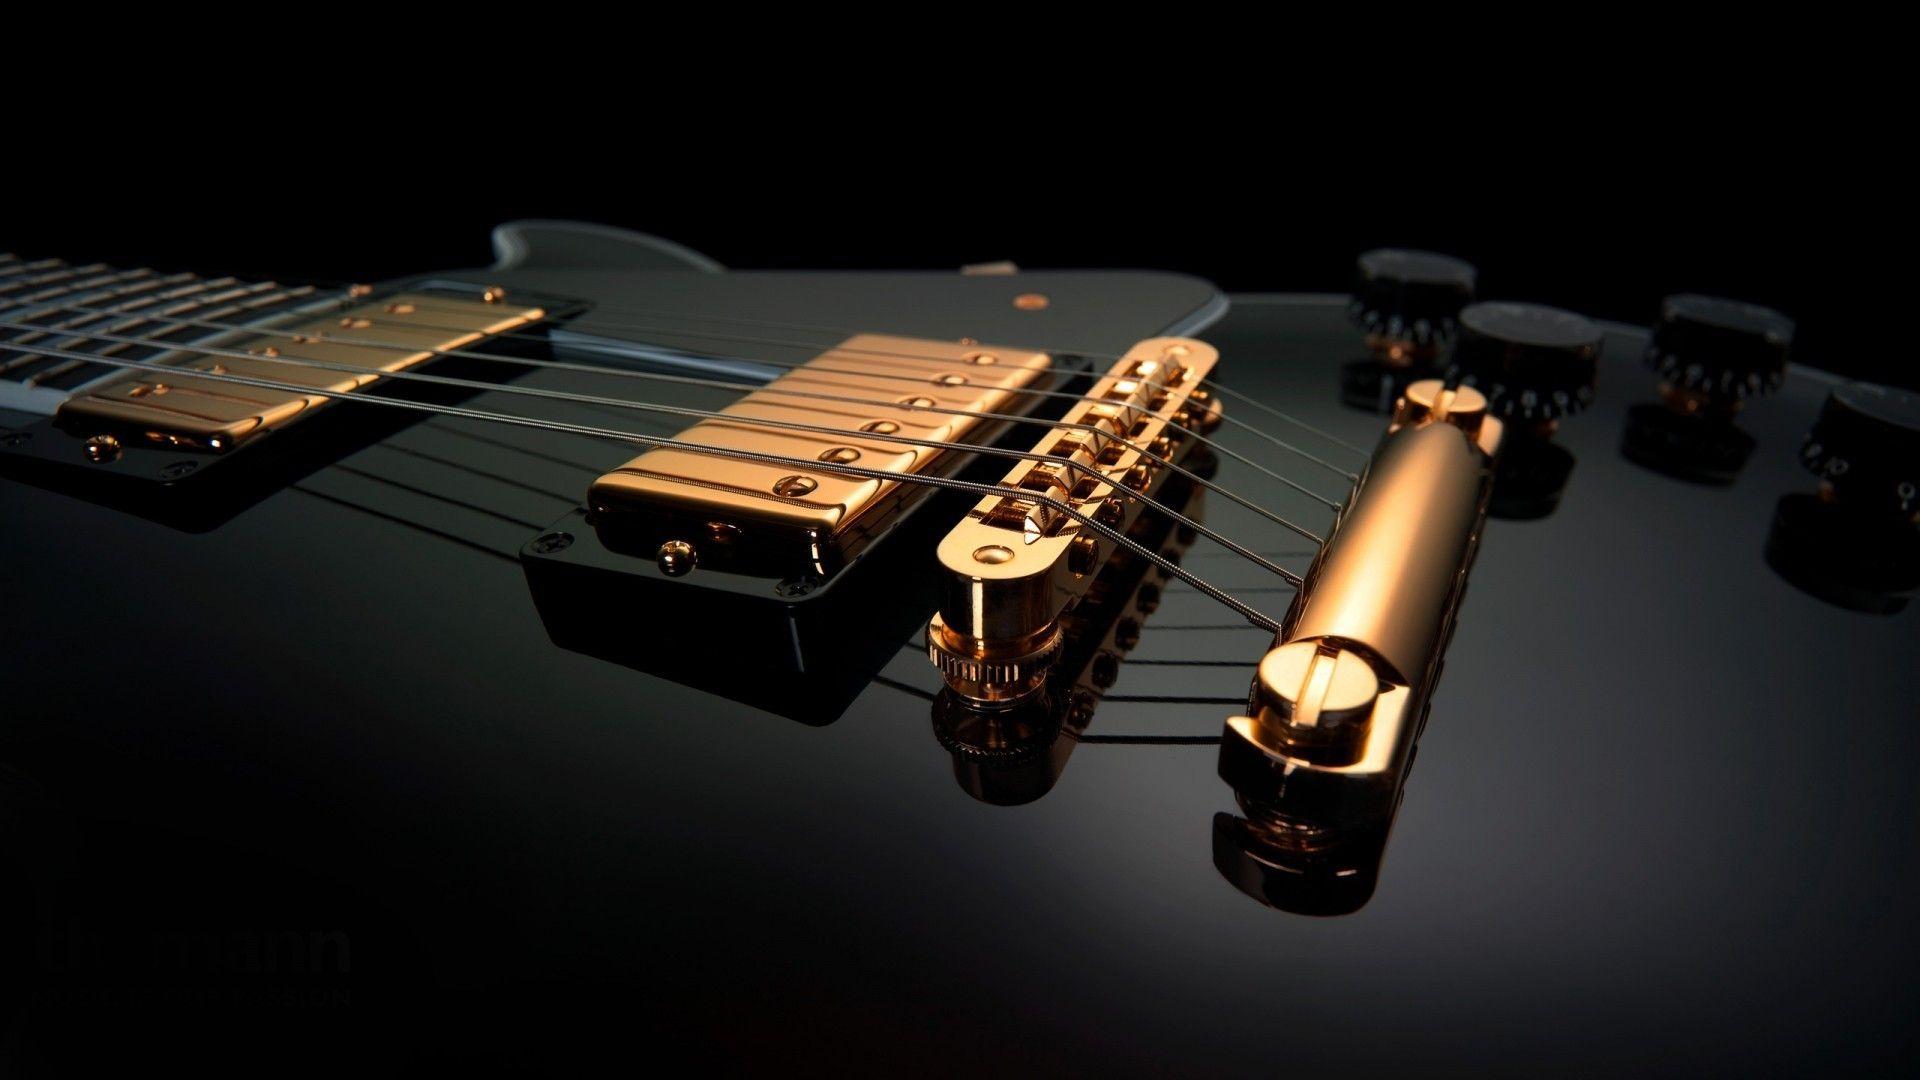 Black and gold guitars music wallpaper. PC